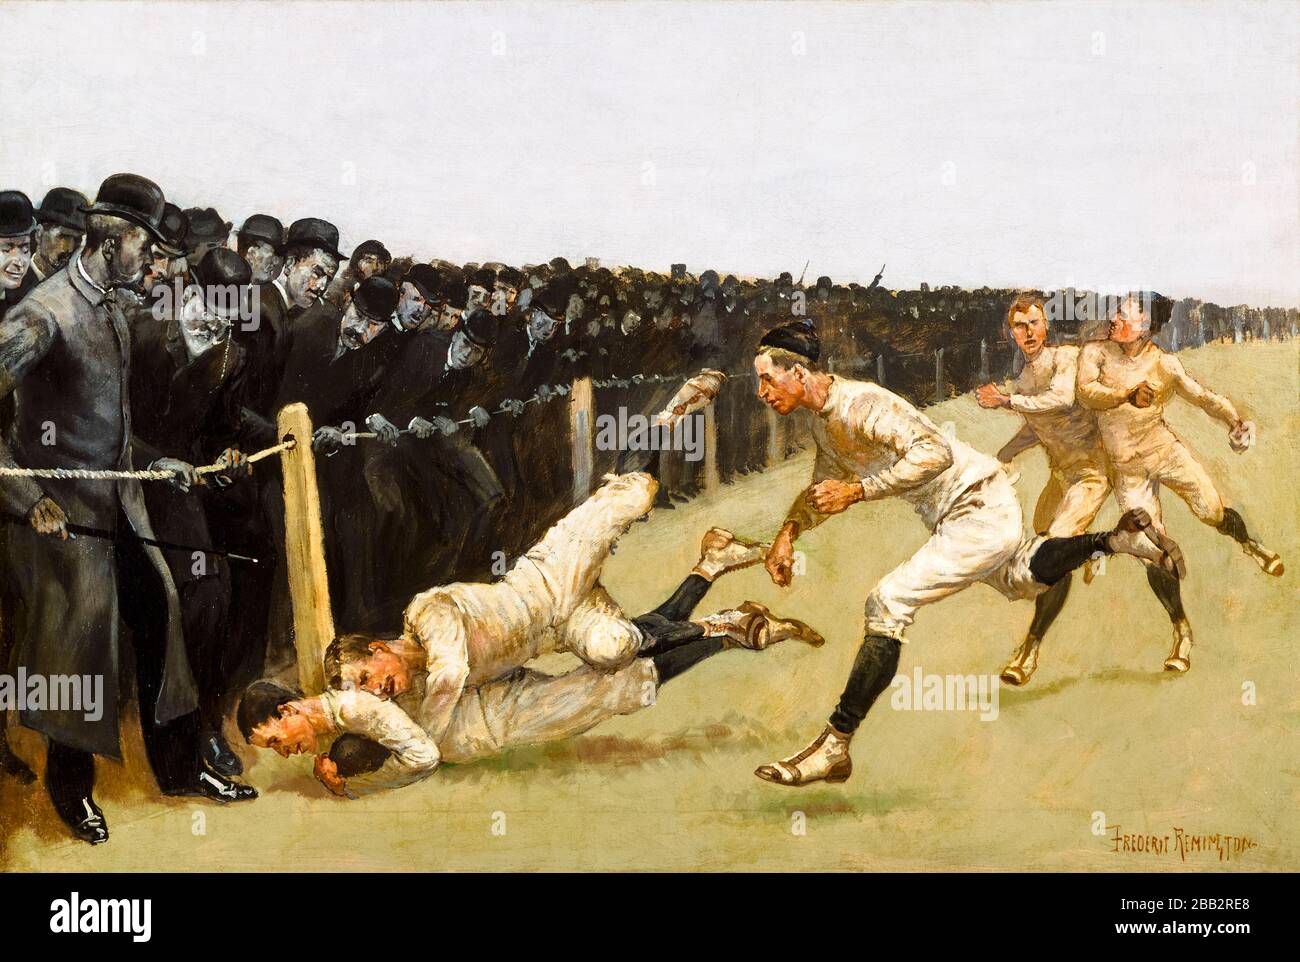 Touchdown, Yale vs Princeton, Thanksgiving Day Nov 27th 1890, Yale 32 Princeton 0, (19th Century, American football game), painting by Frederic Remington, 1890-1899 Stock Photo